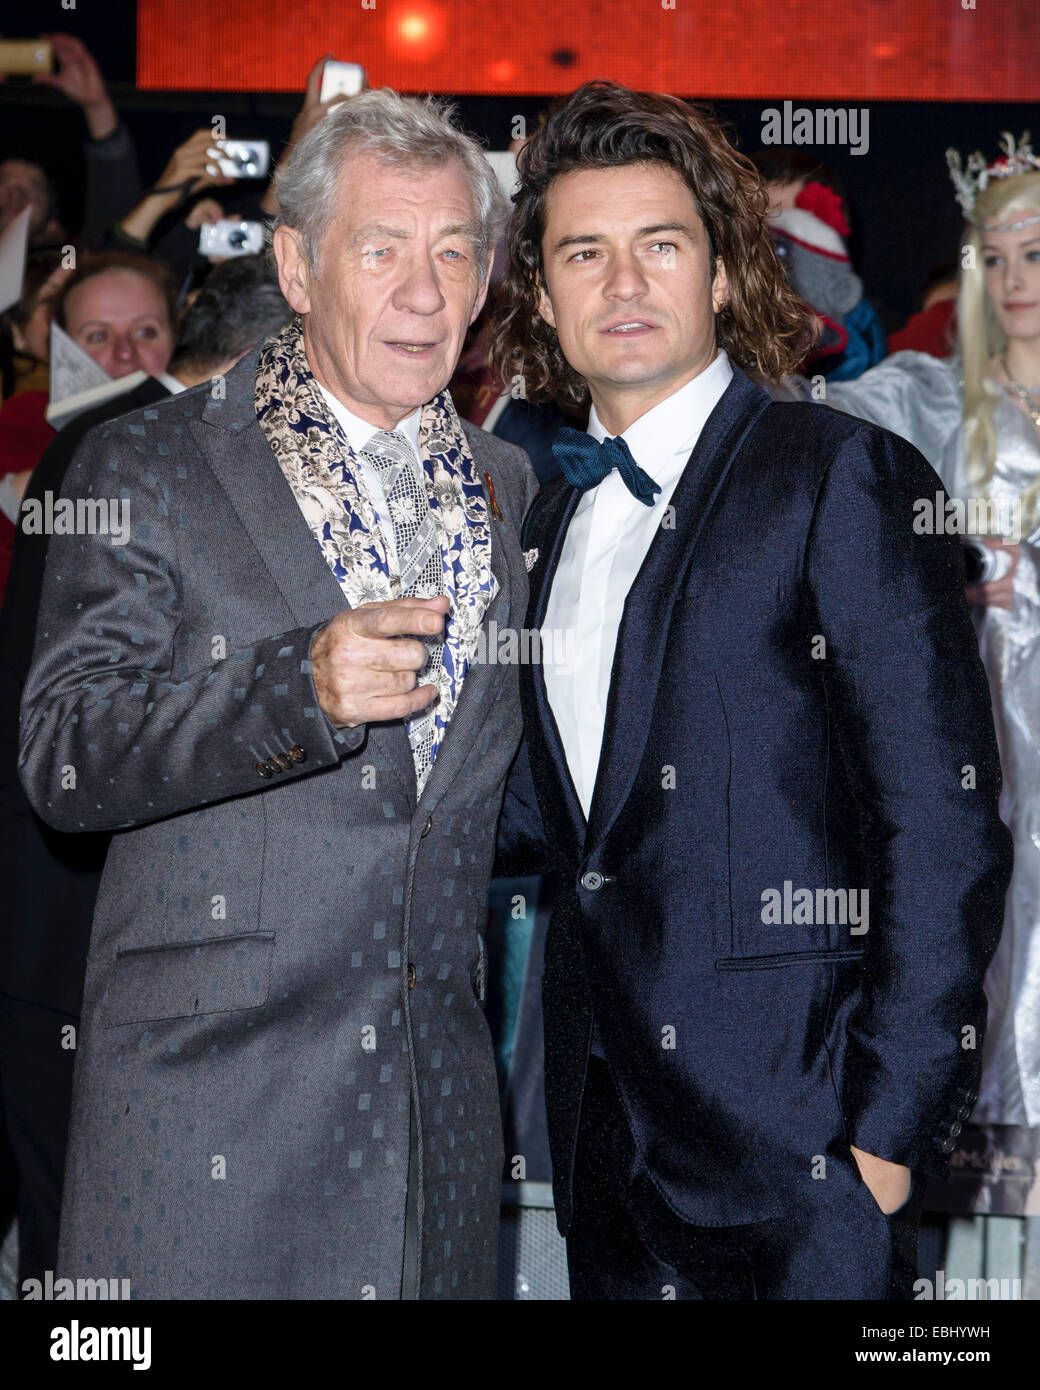 London, UK. 1st December, 2014. Ian McKellen and Orlando Bloom attends the The World Premiere of The Hobbit: The Battle of 5 Armies on 01/12/2014 at The Empire Leicester Square, London. Persons pictured: Ian McKellen, Orlando Bloom. Credit:  Julie Edwards/Alamy Live News Stock Photo